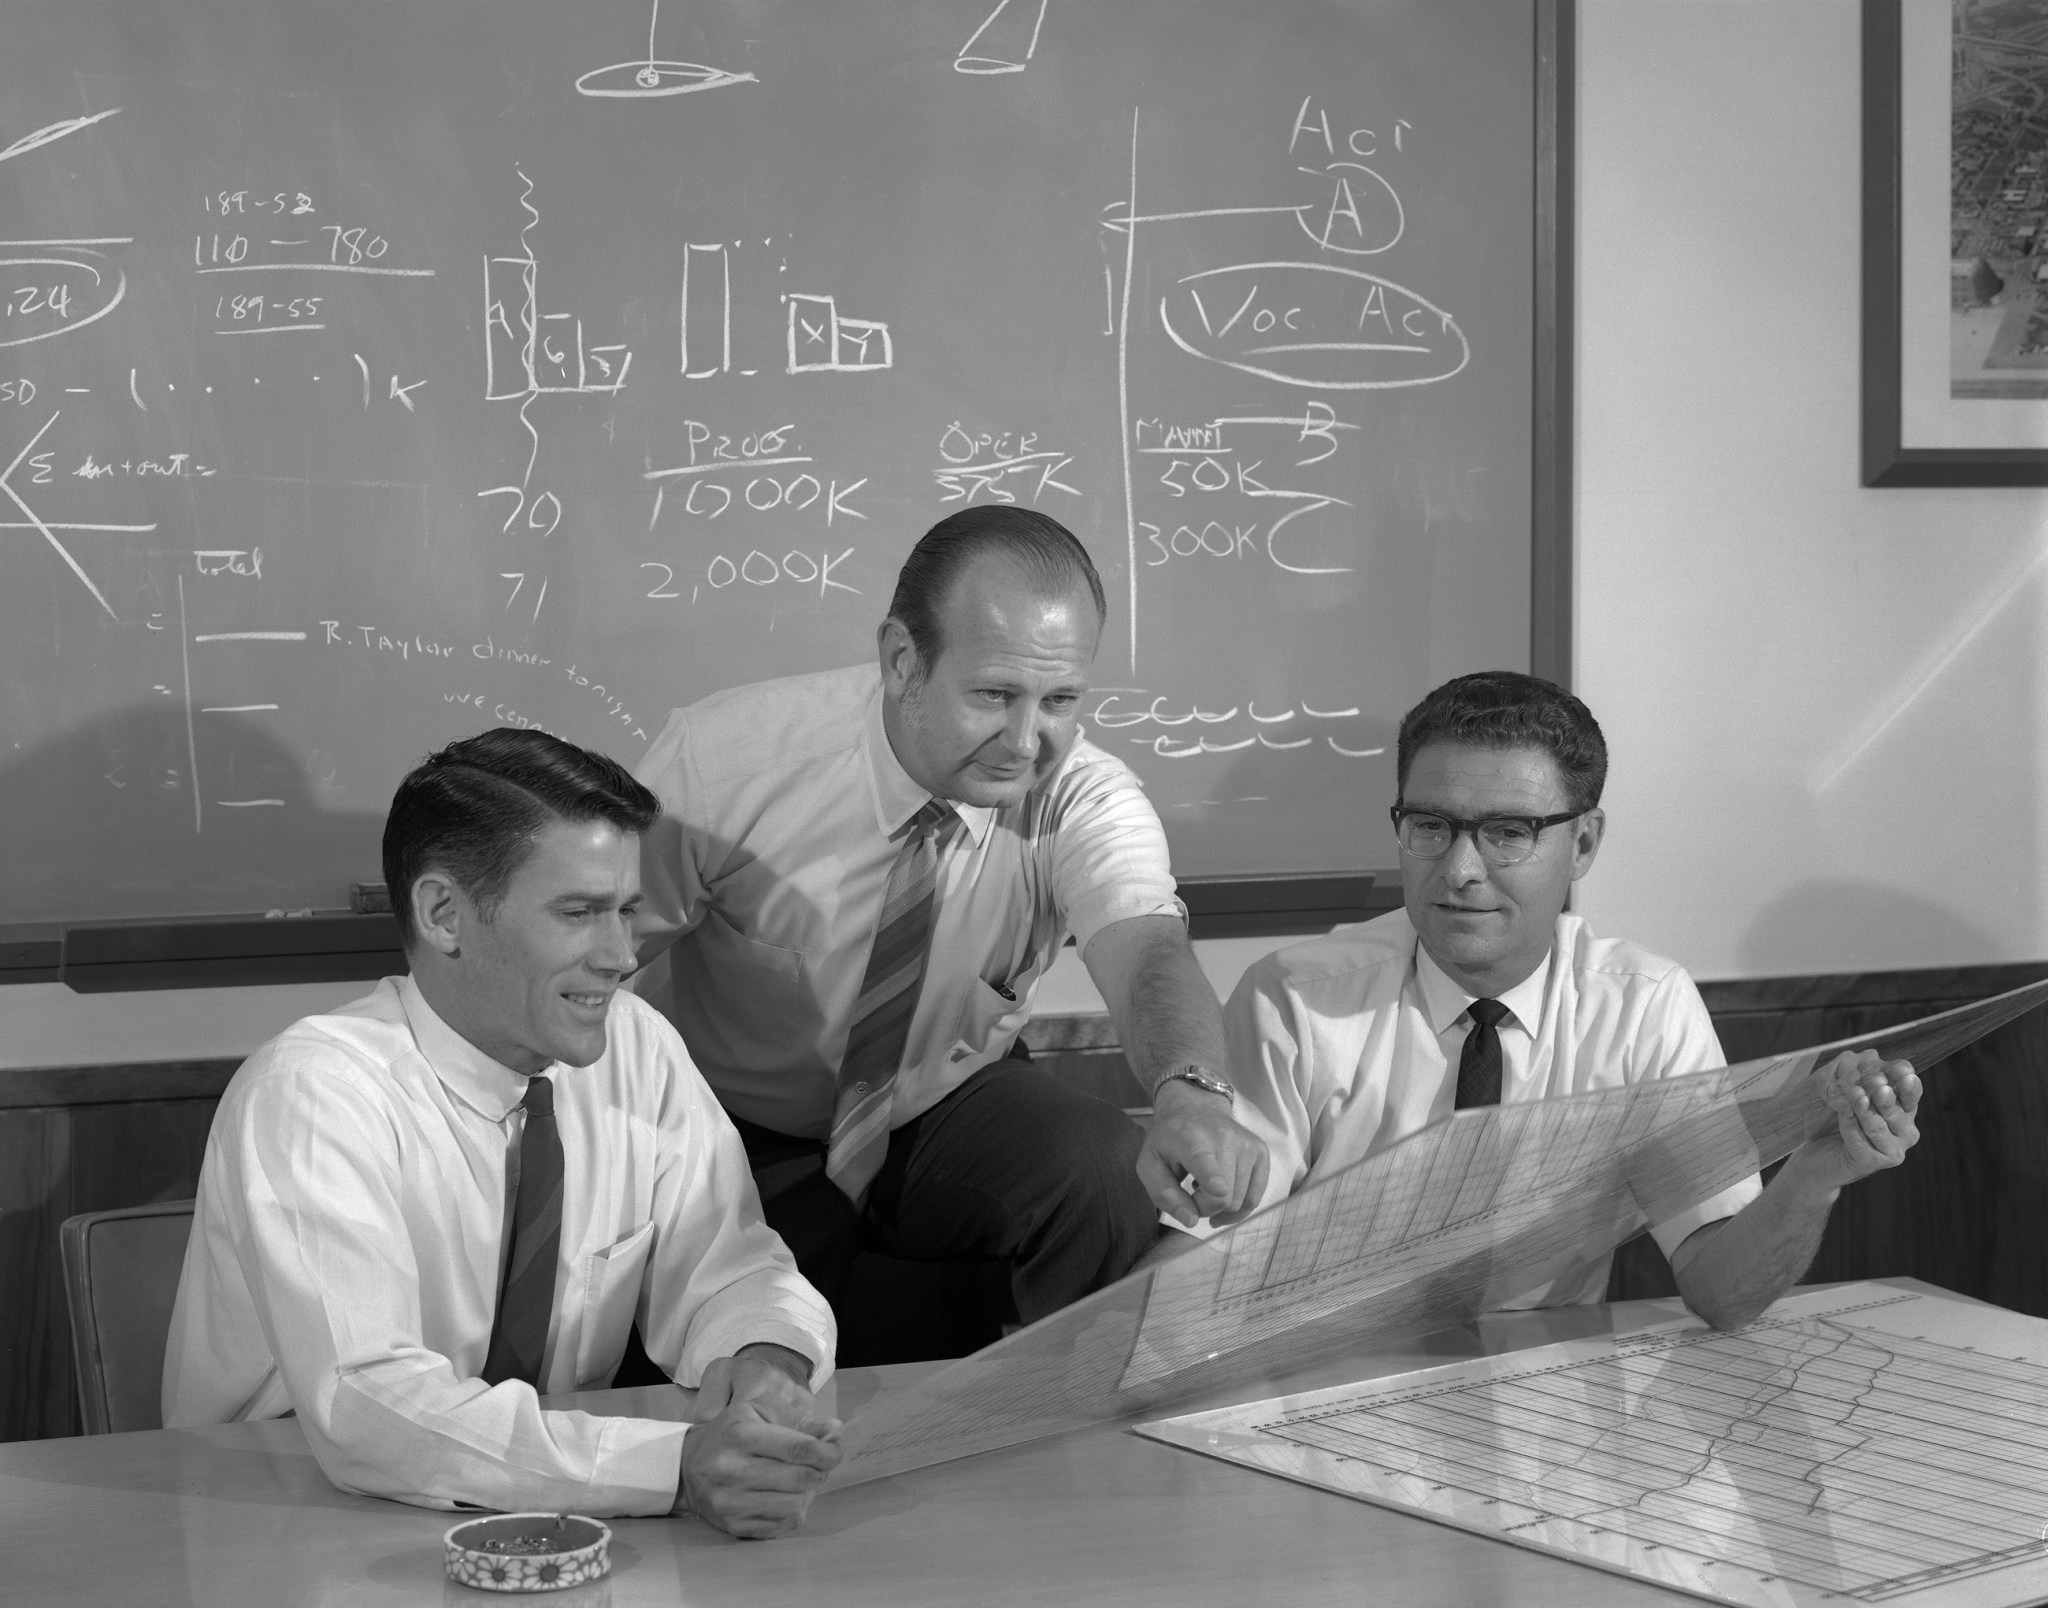 Ames Research Center Engineers discuss aircraft design and handling. Pictured are (left to right) Allen Faye, Merrill Mead, and John “Jack” Boyd. (21 Apr. 1970)